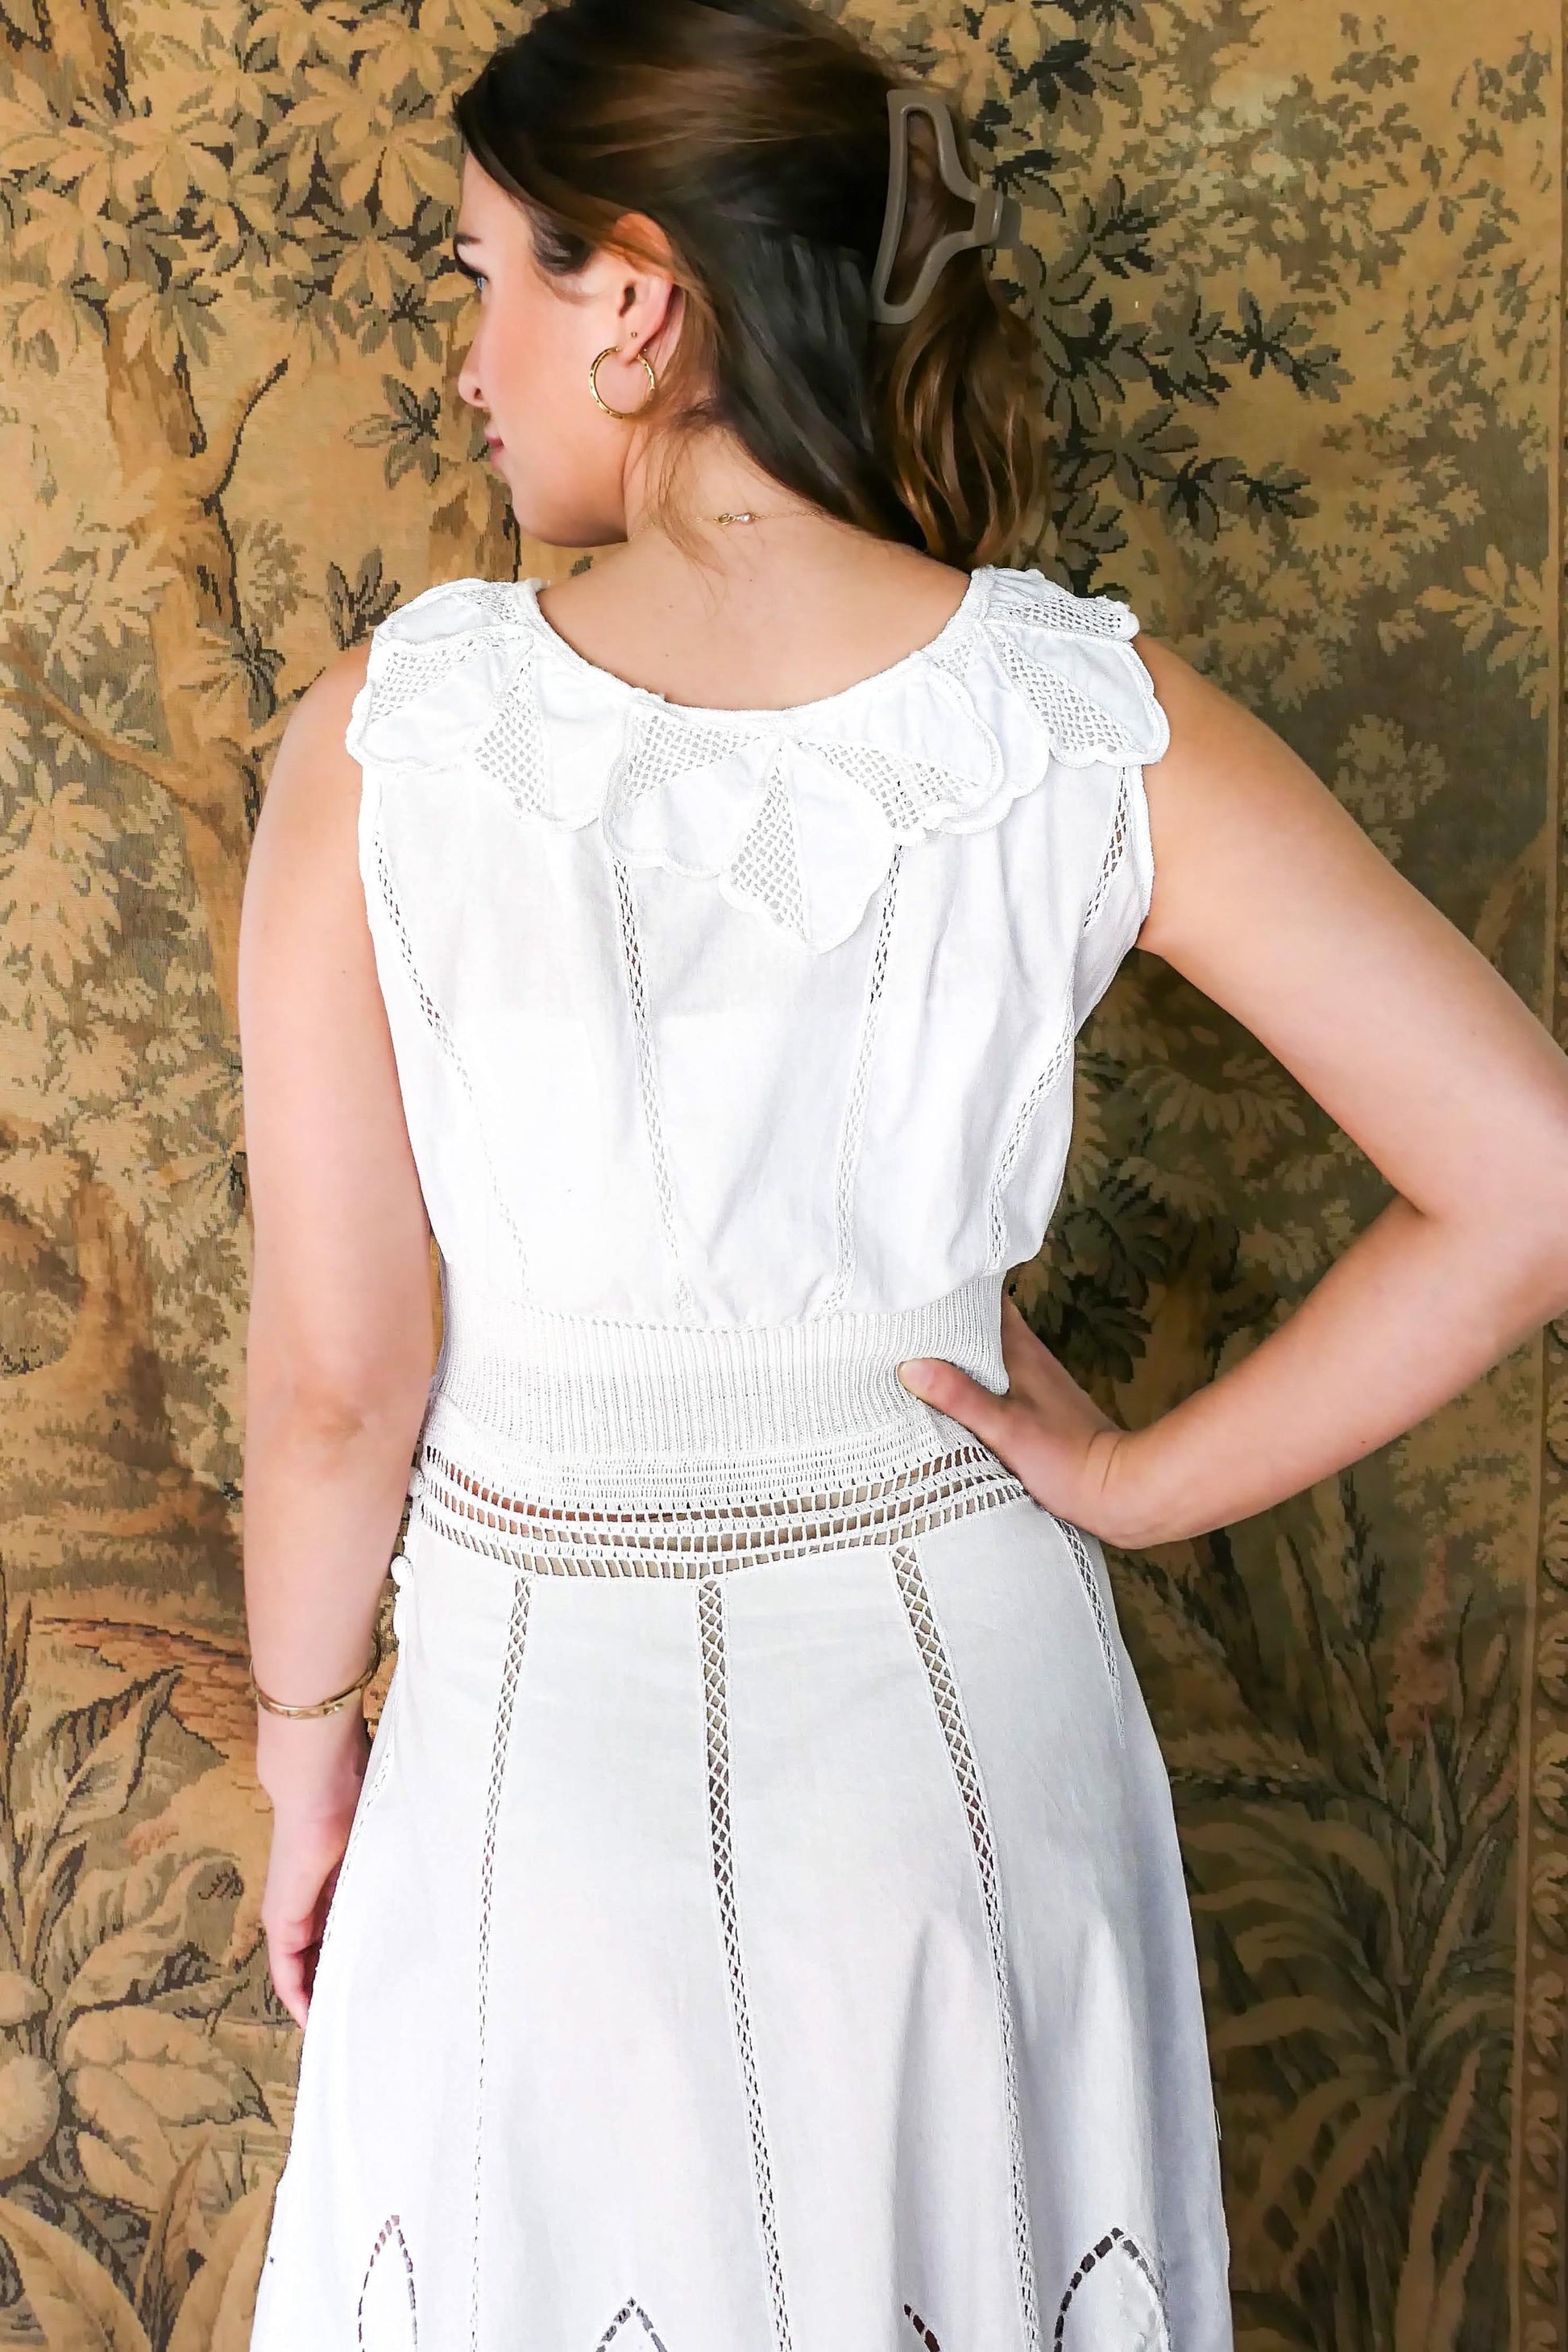 Closeup view of back of dress with floral inspired collar.  A white cotton midi dress with whimsical crochet and embroidered flowers at the hem and collar, and teardrop shaped eyelet detail on the skirt. Stretchable ribbed knit fabric around the waist adds contour to the dress.